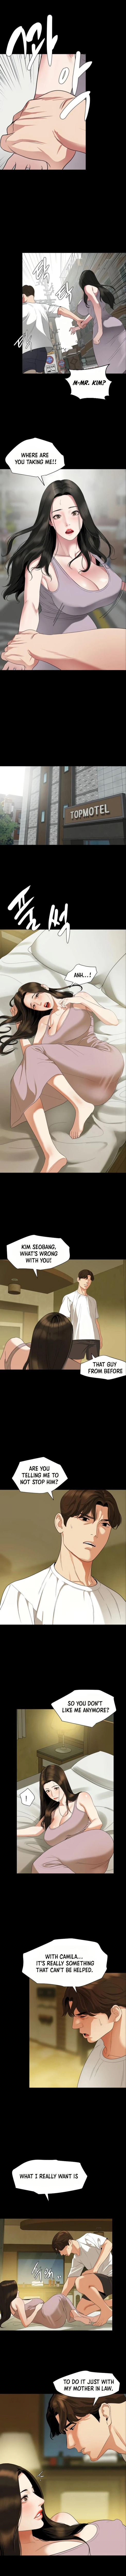 [Kkamja] Don't be like this son-in-law [English] 457